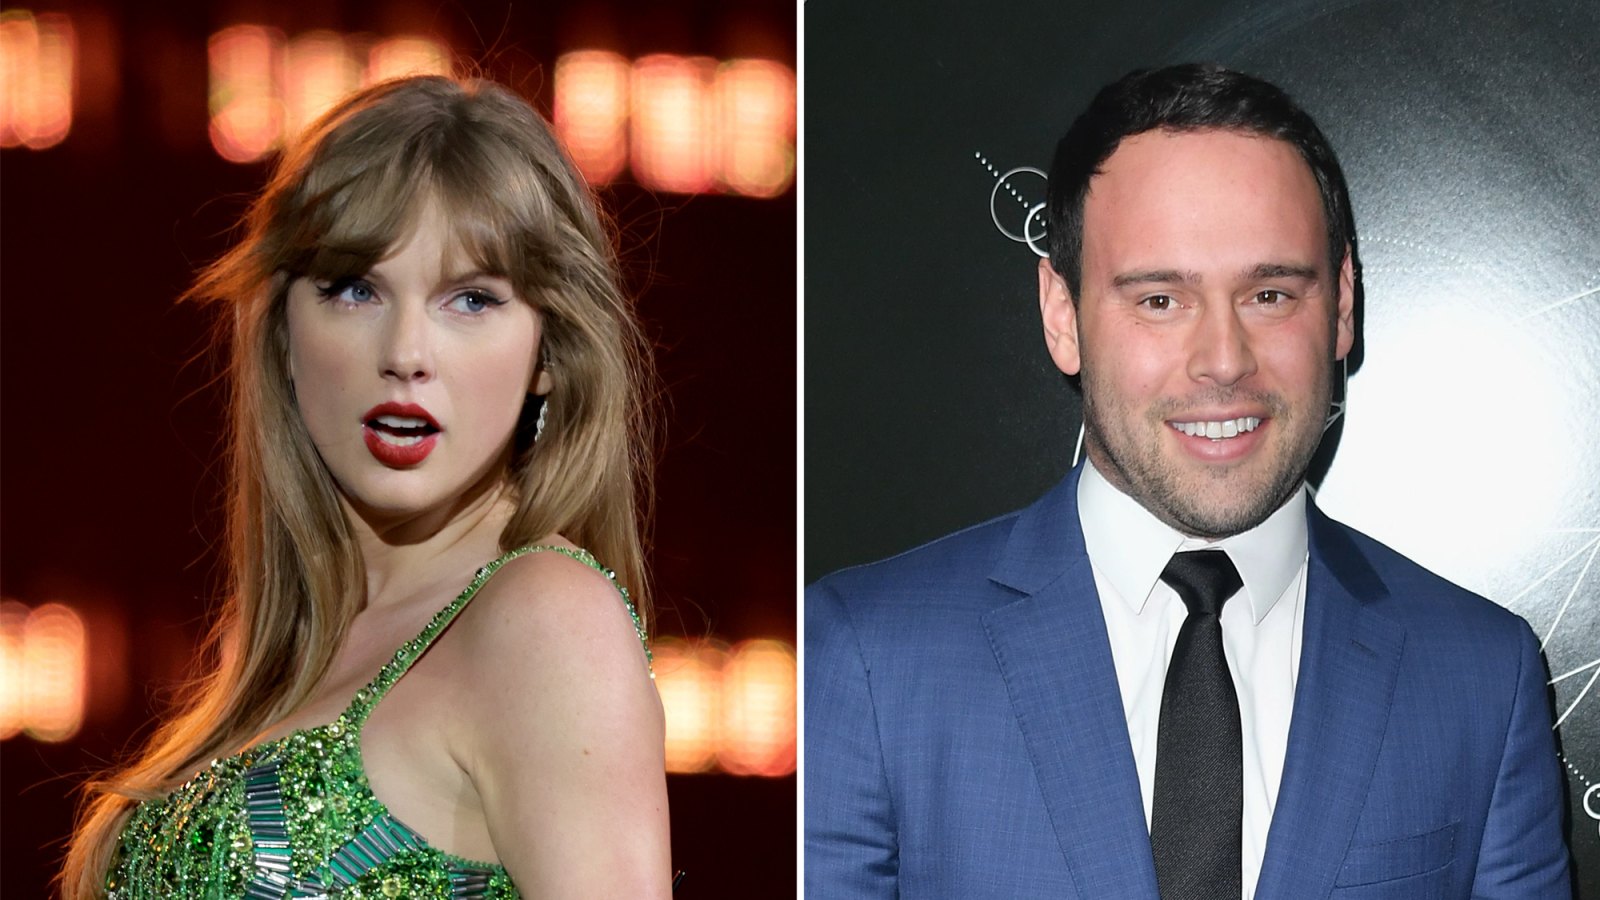 Taylor Swift and Scooter Braun's Feud: A Complete Timeline